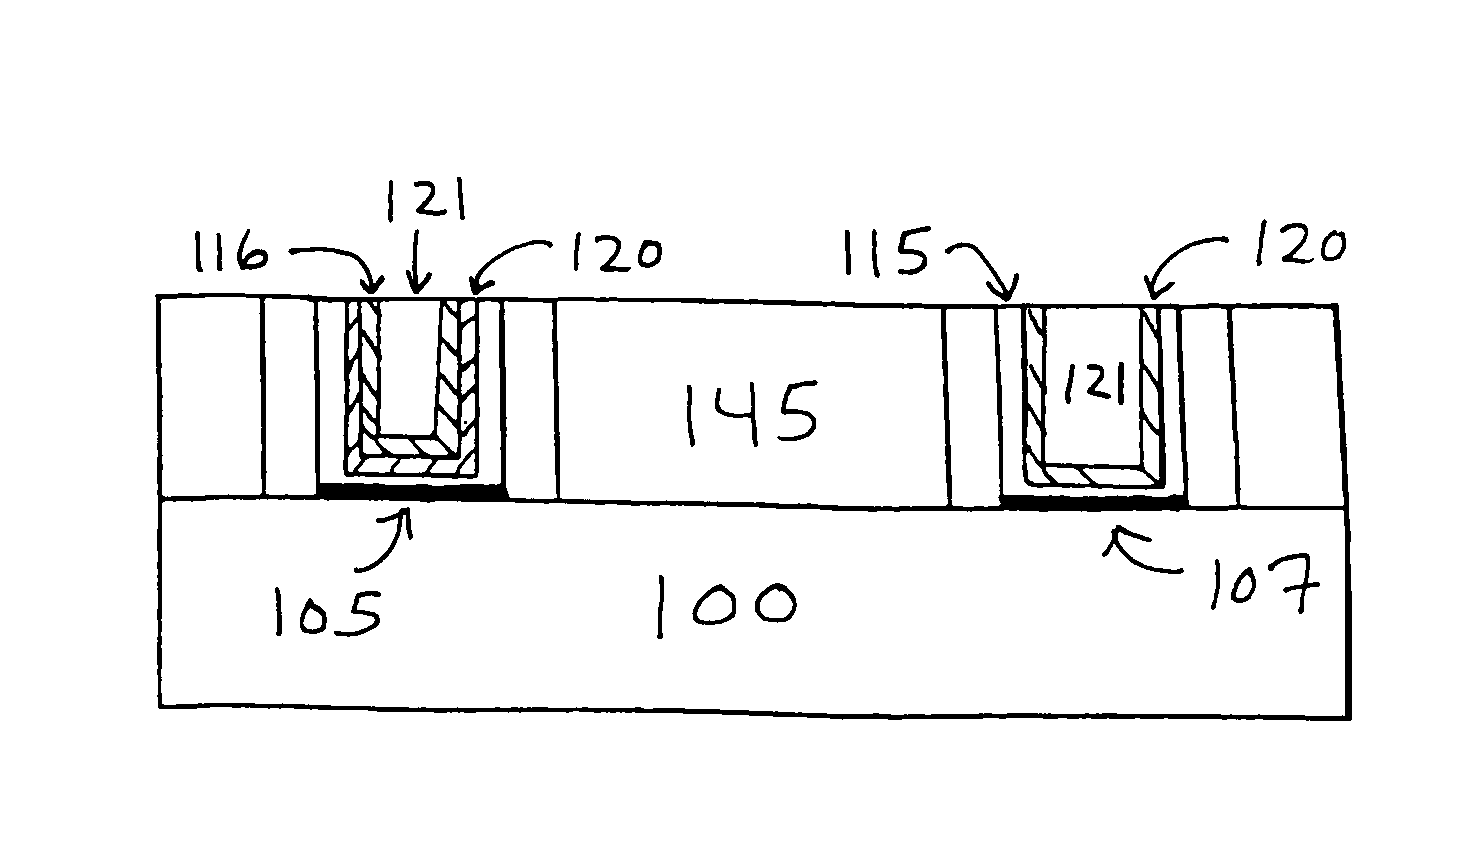 Method for making a semiconductor device with a high-k gate dielectric and a metal gate electrode